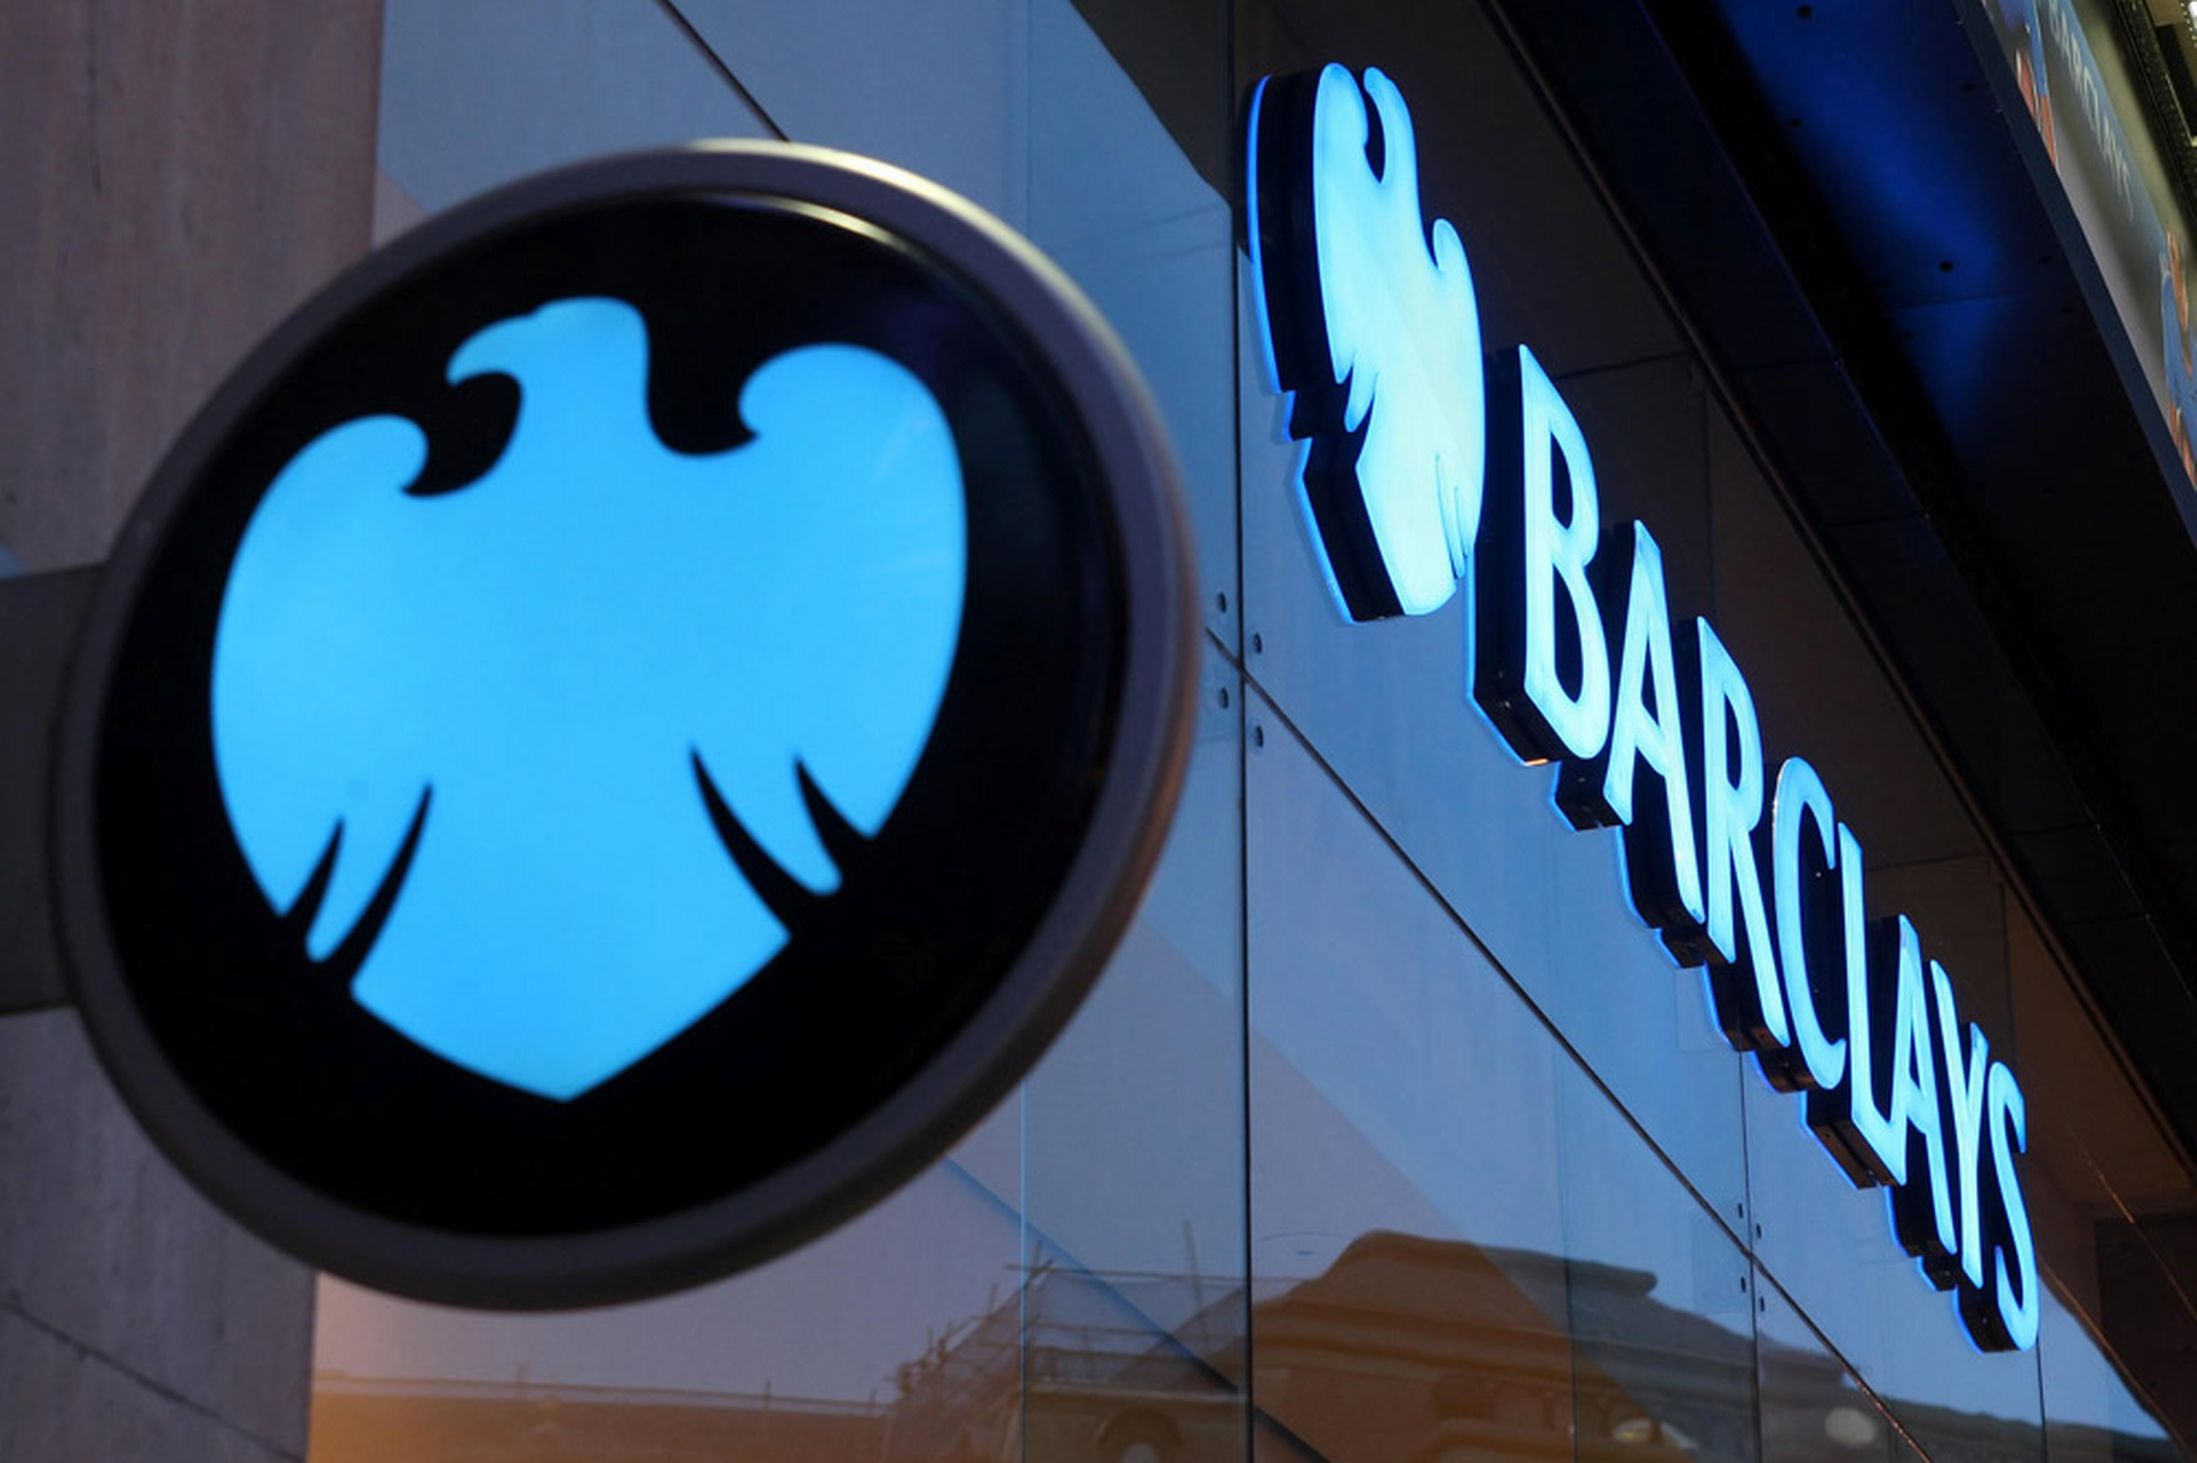 Barclays Sees Opportunity in Green Transition, Expands Sustainable Financing